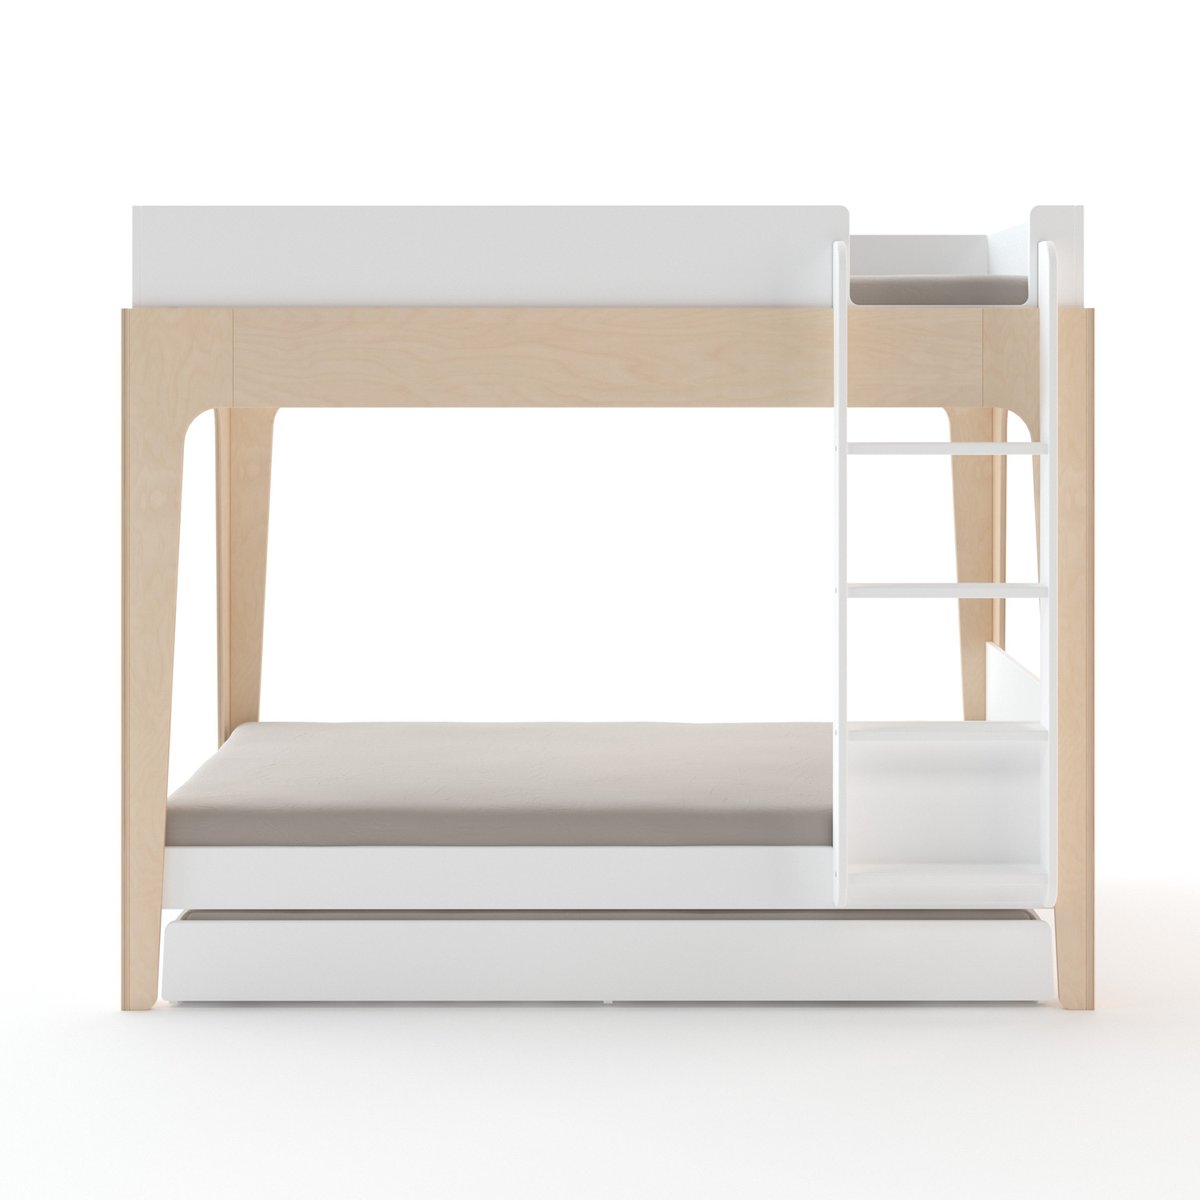 Perch Twin Bunk Bed with Perch Trundle by Oeuf - Maude Kids Decor